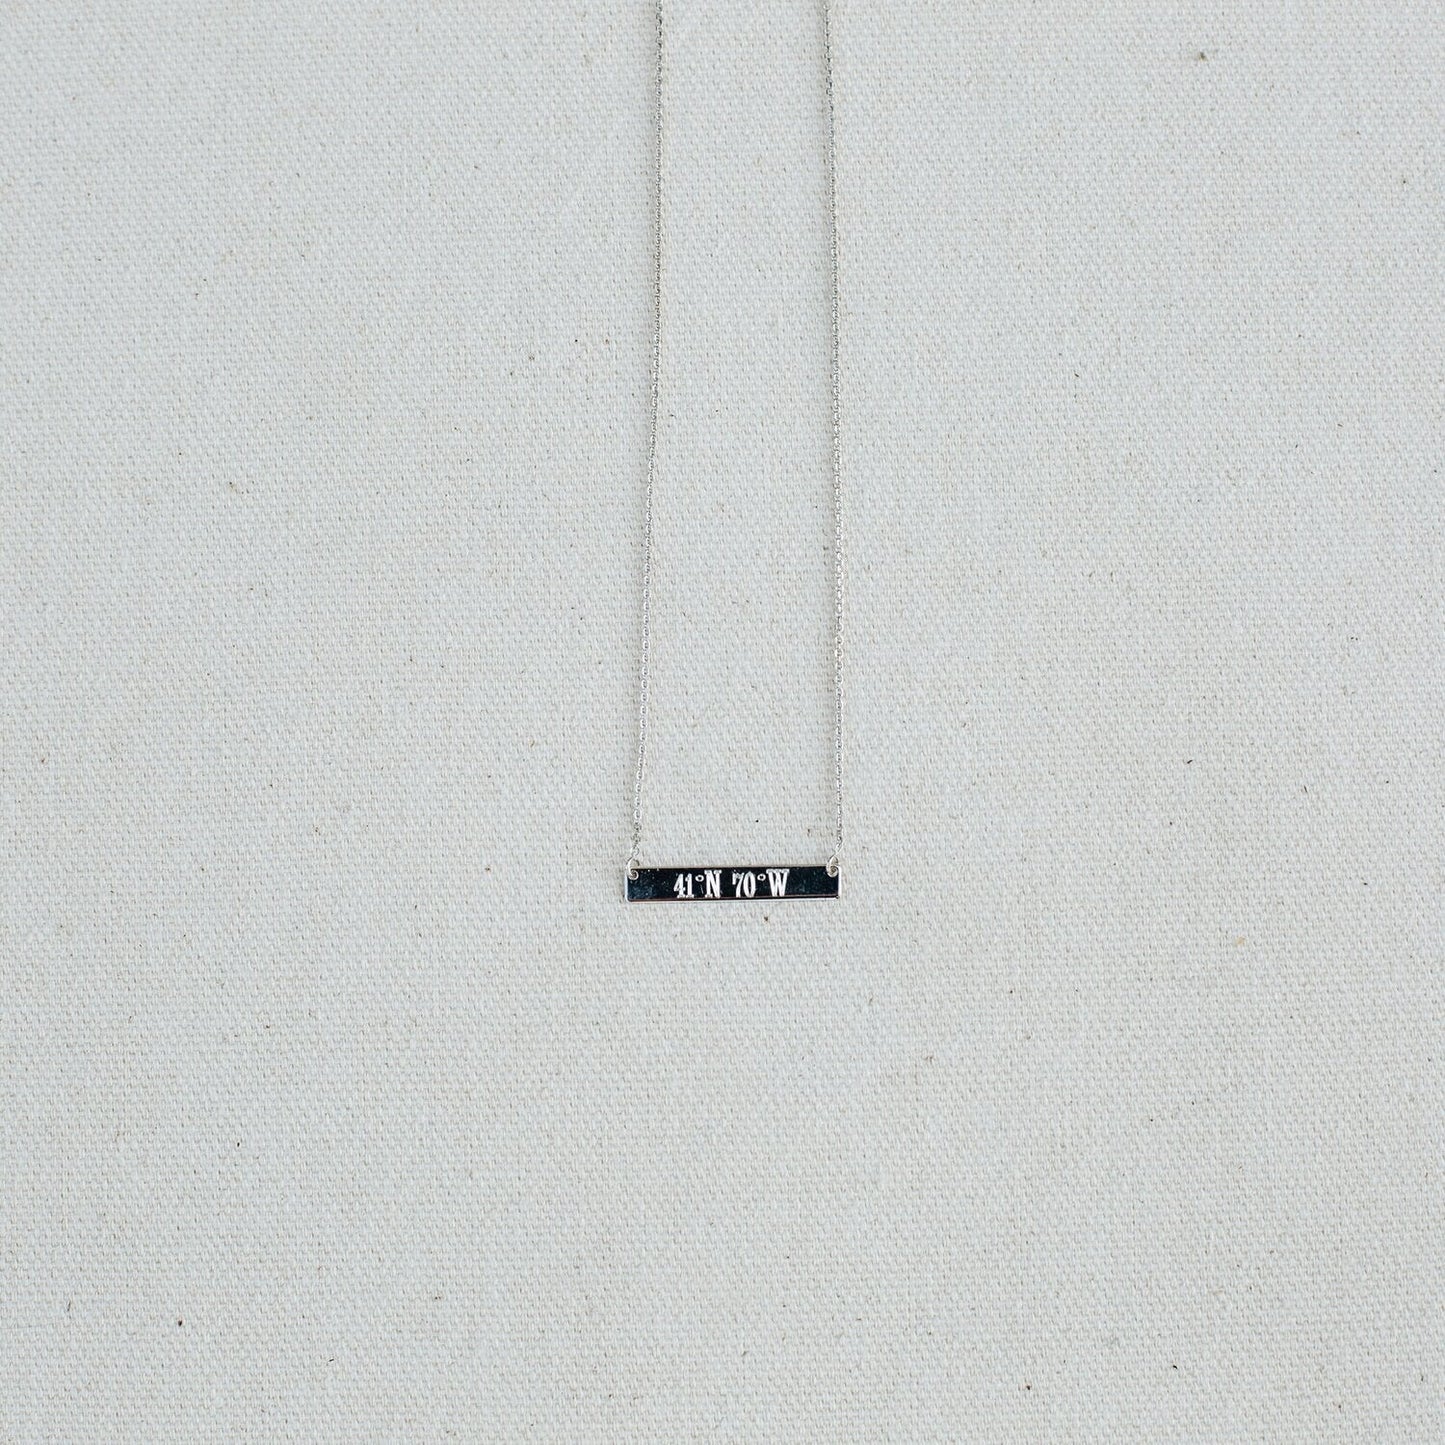 Nantucket Coordinates Engraved Bar Necklace in Sterling SIlver handmade by Jewel in the Sea Nantucket